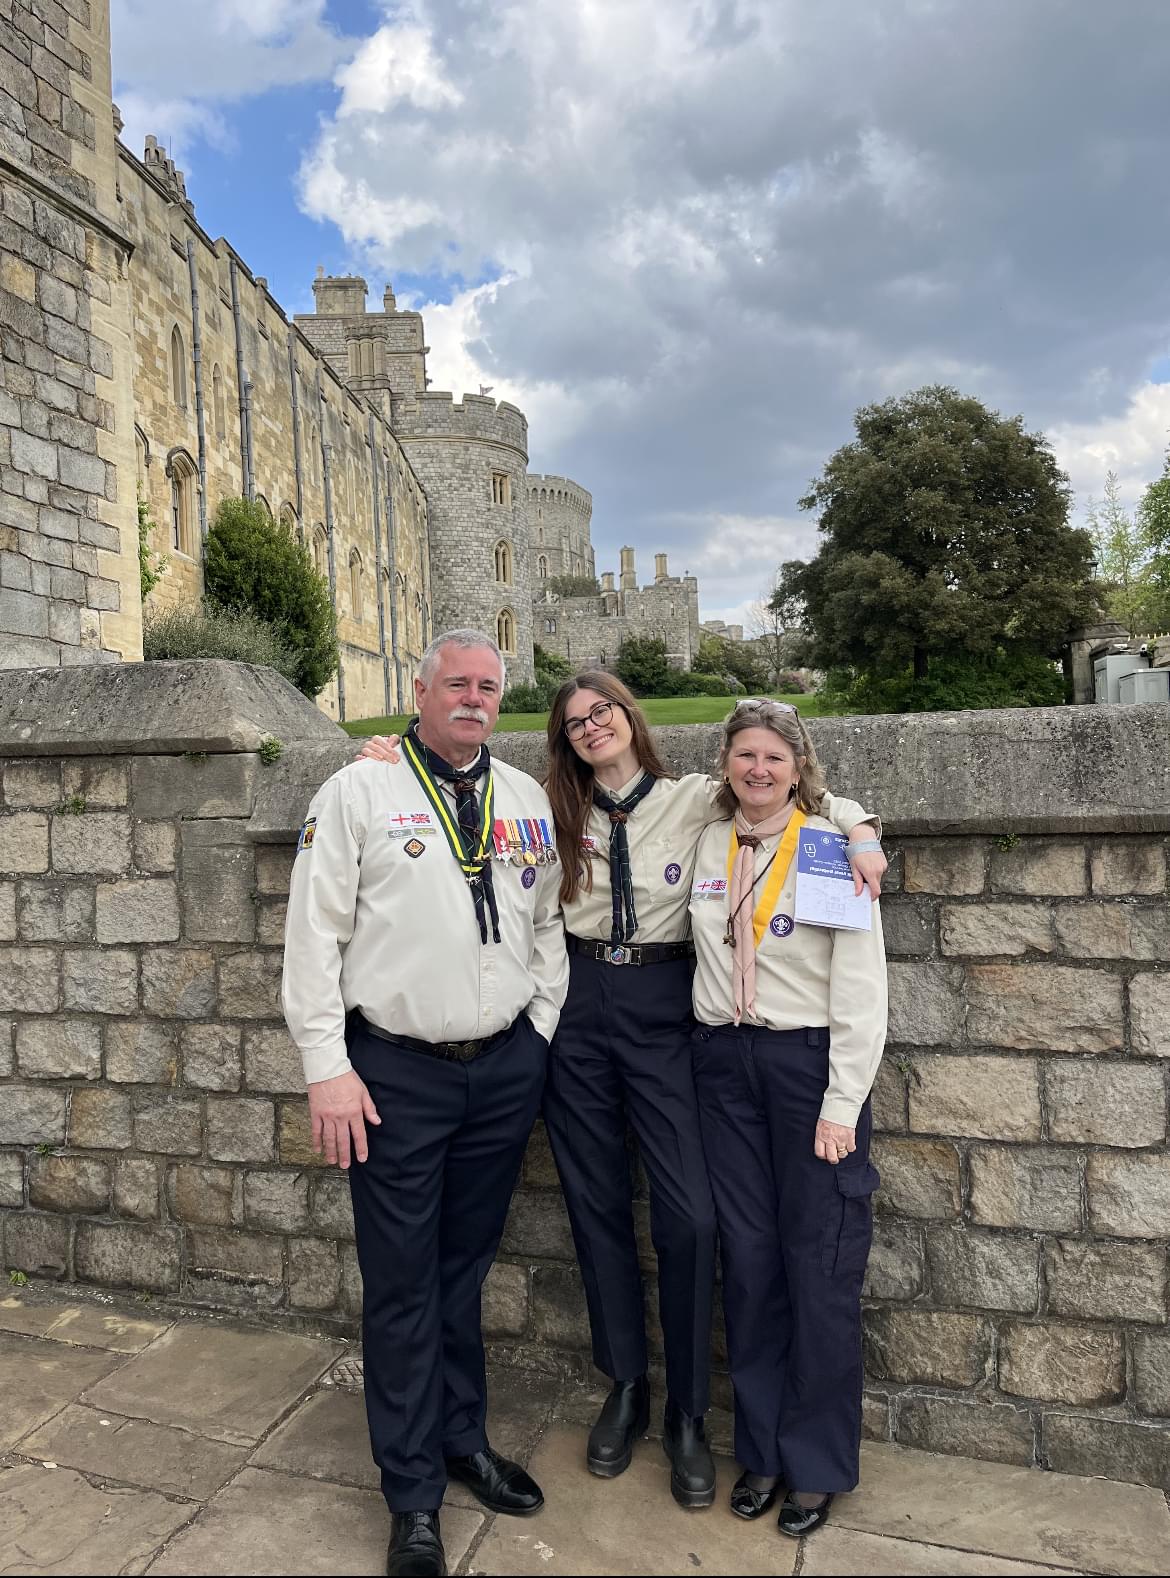 Hannah, Steve and Sue Ralph stood by one of the walls of Windsor castle. Hannah is in the middle with her arms round Steve and Sue, with one hand holding her award. They're all dressed in formal Scout uniform, with neckers, lots of badges and medals.